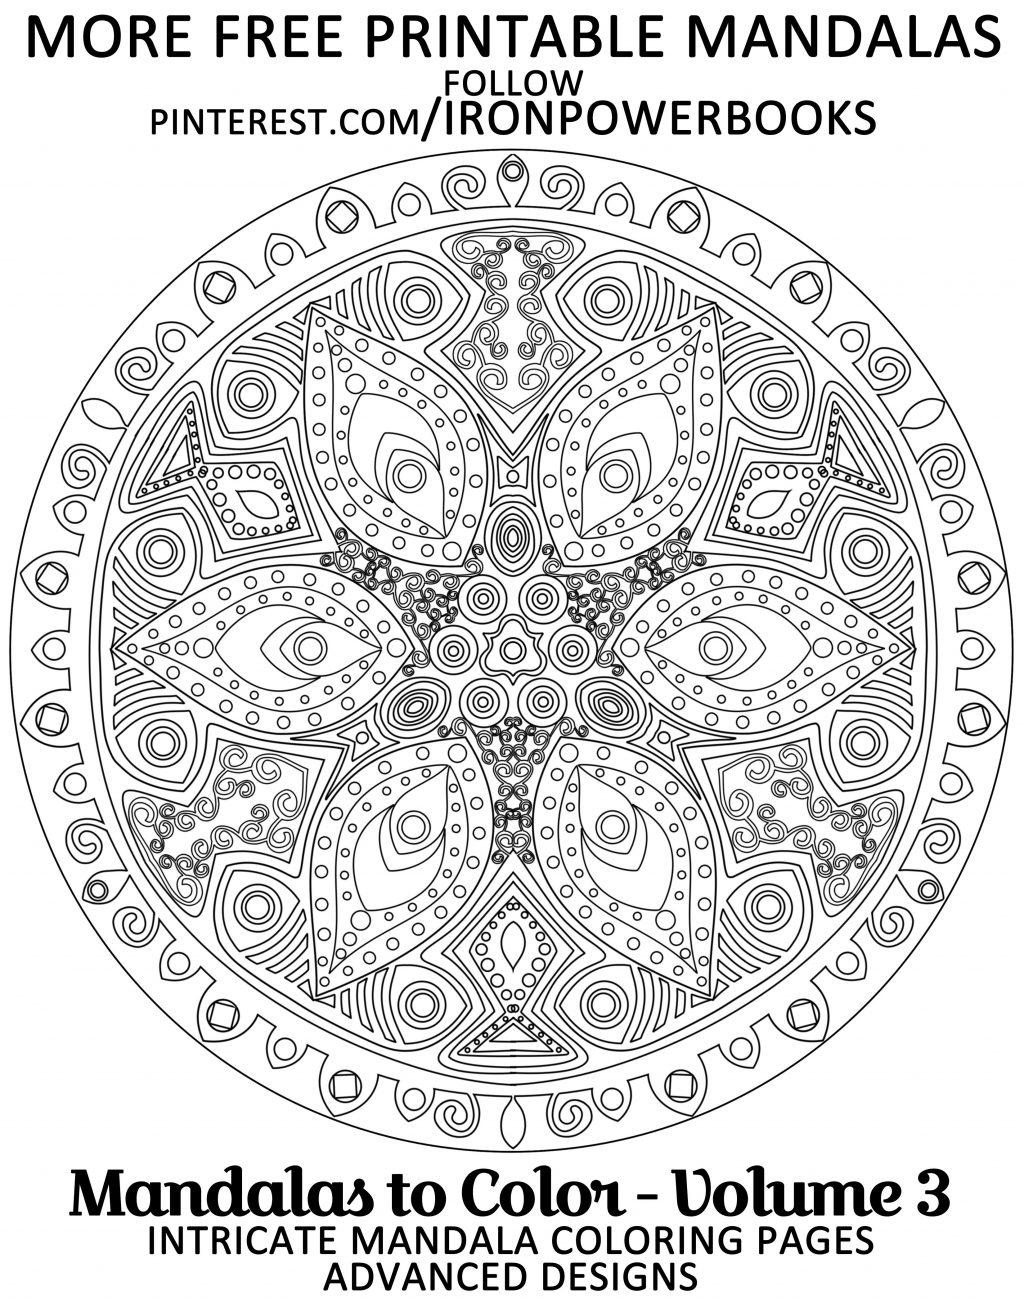 Free Printable Mandala Coloring Pages Adults Coloring Books Freeble Mandala Coloring Pages Advanced For Adults